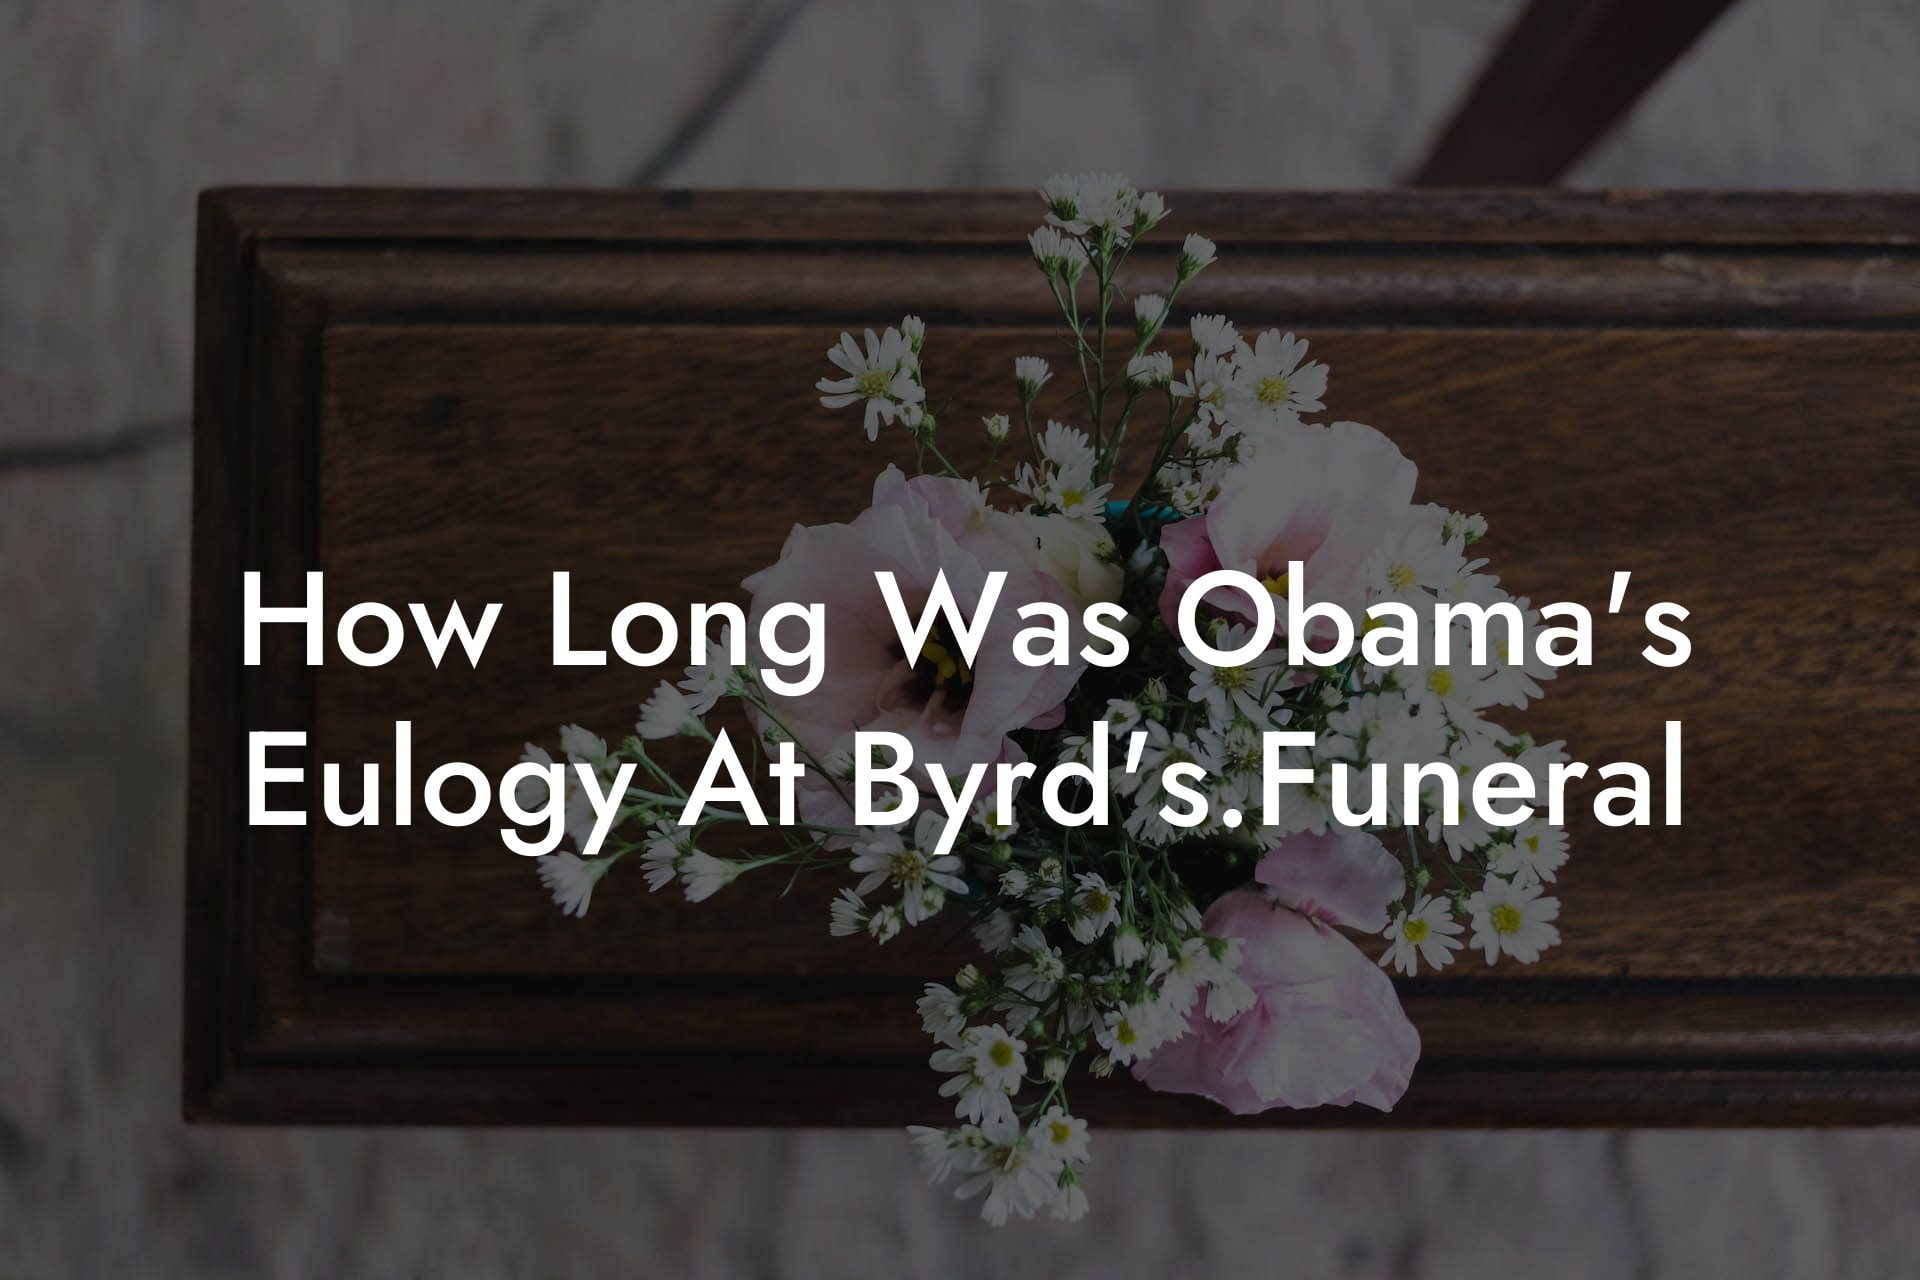 How Long Was Obama's Eulogy At Byrd's.Funeral